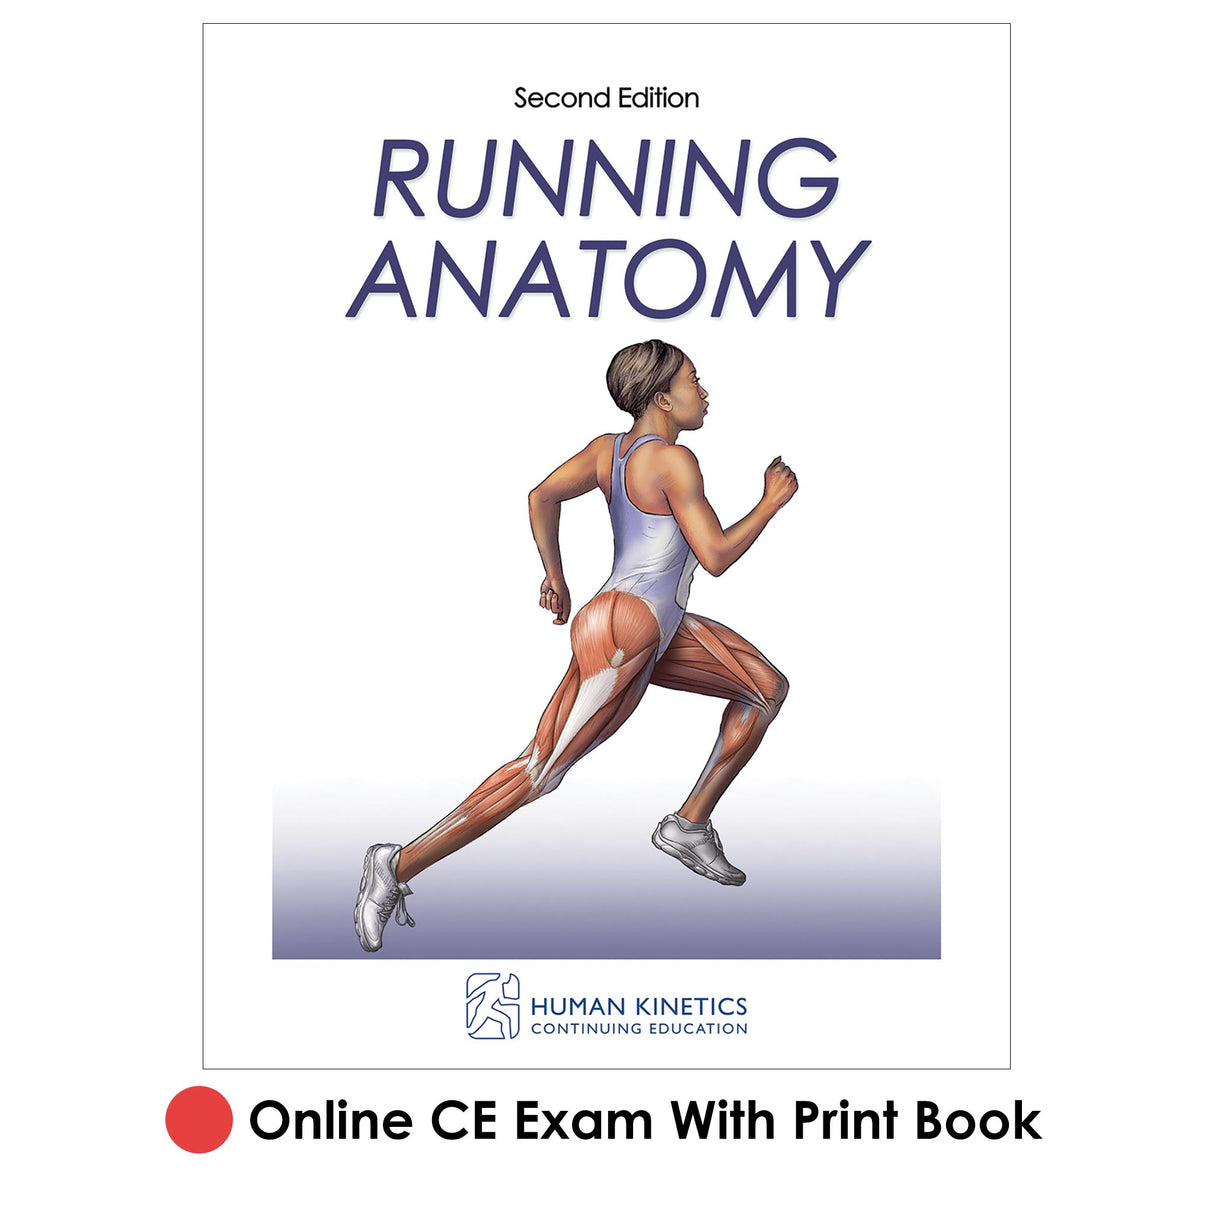 Running Anatomy 2nd Edition Online CE Exam With Print Book